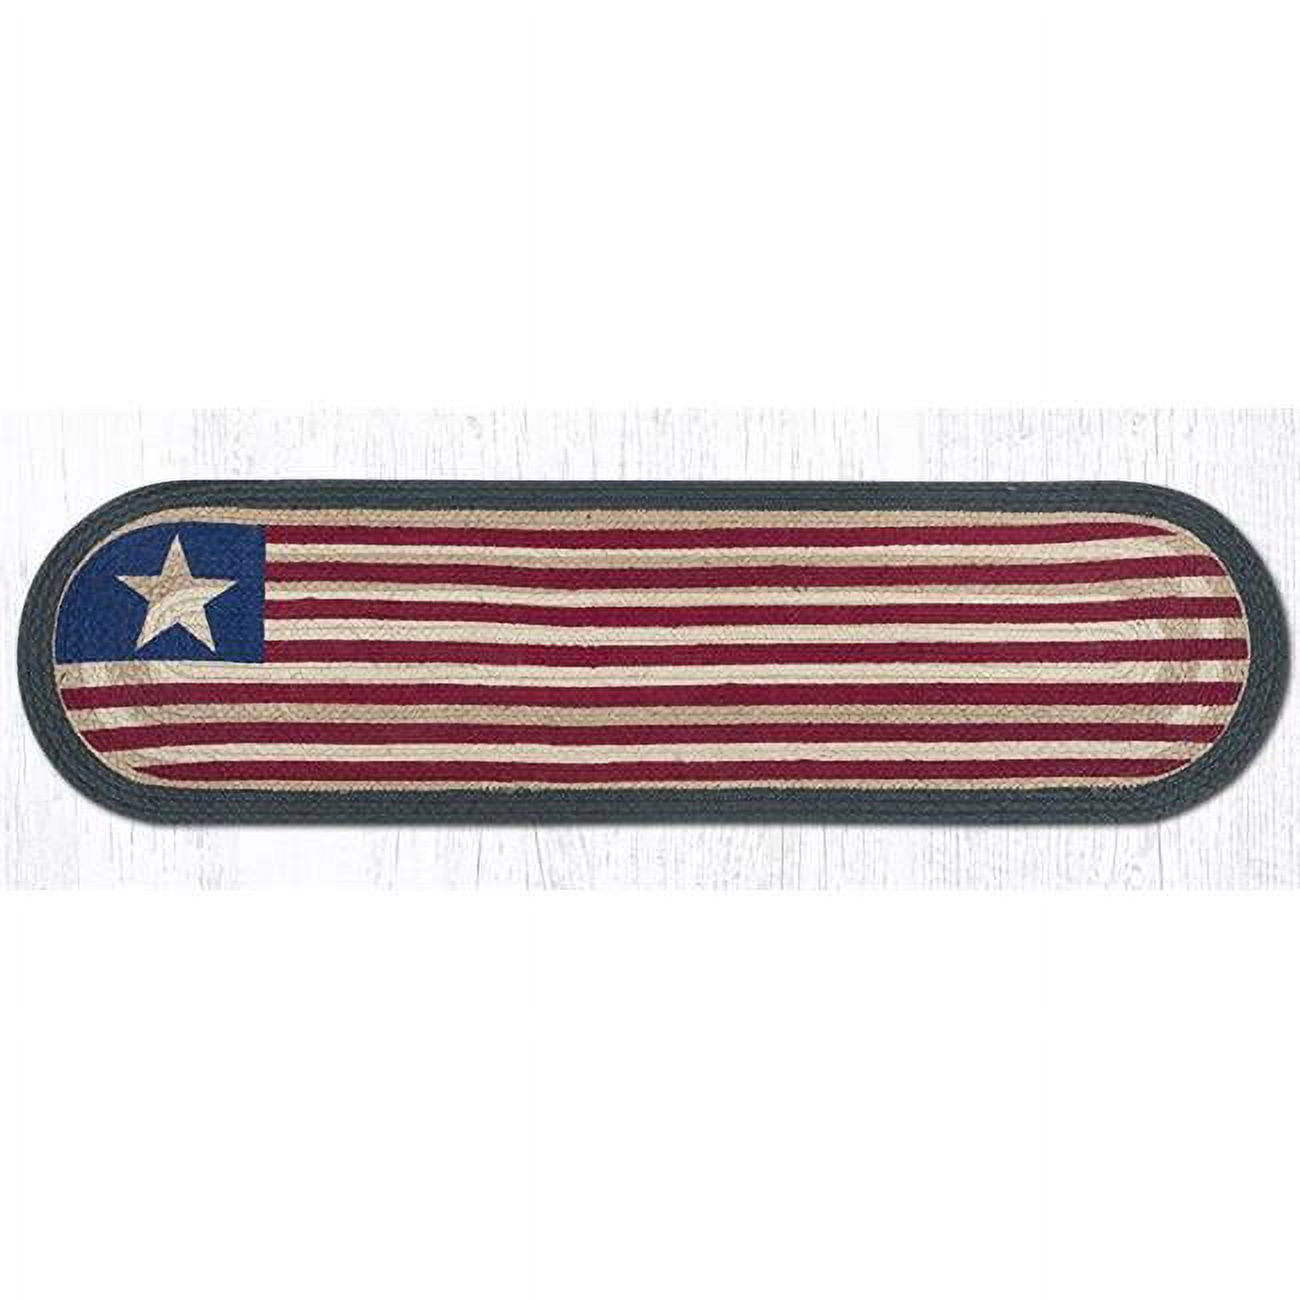 Picture of Capitol Importing 64-1032 13 x 48 in. Original Flag Oval Patch Runner